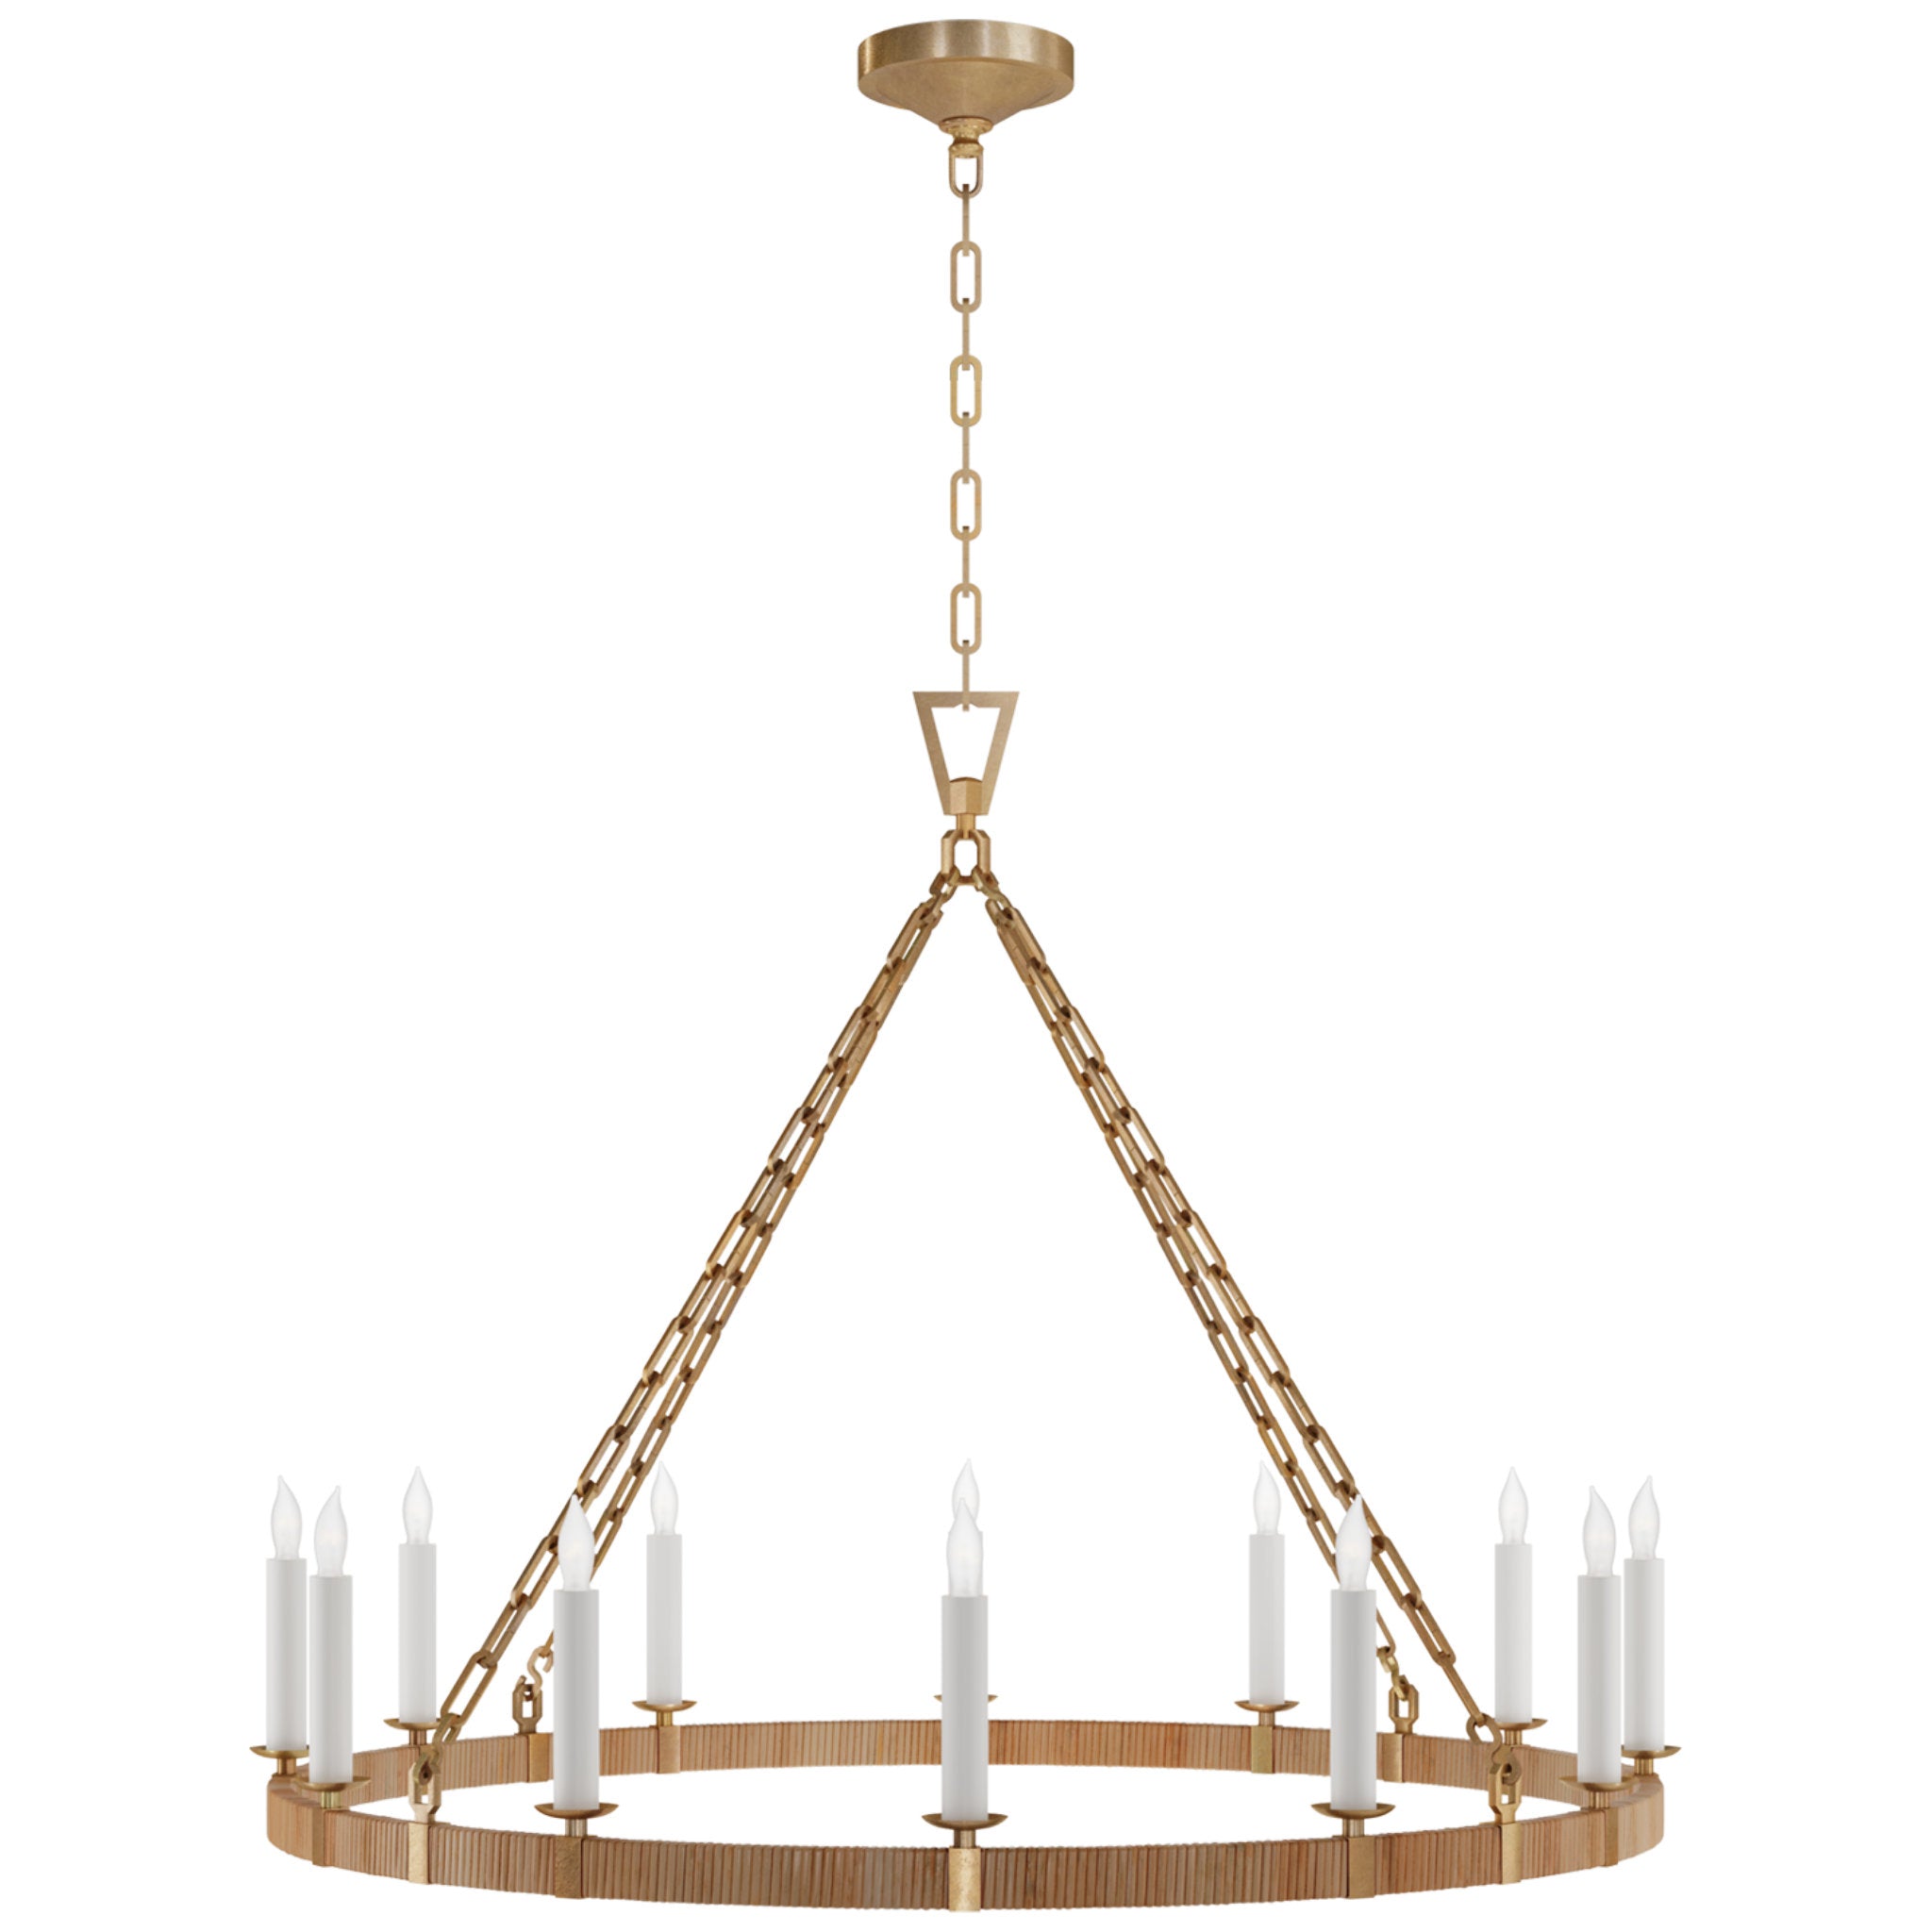 Chapman & Myers Darlana Large Wrapped Ring Chandelier in Antique-Burnished Brass and Natural Rattan